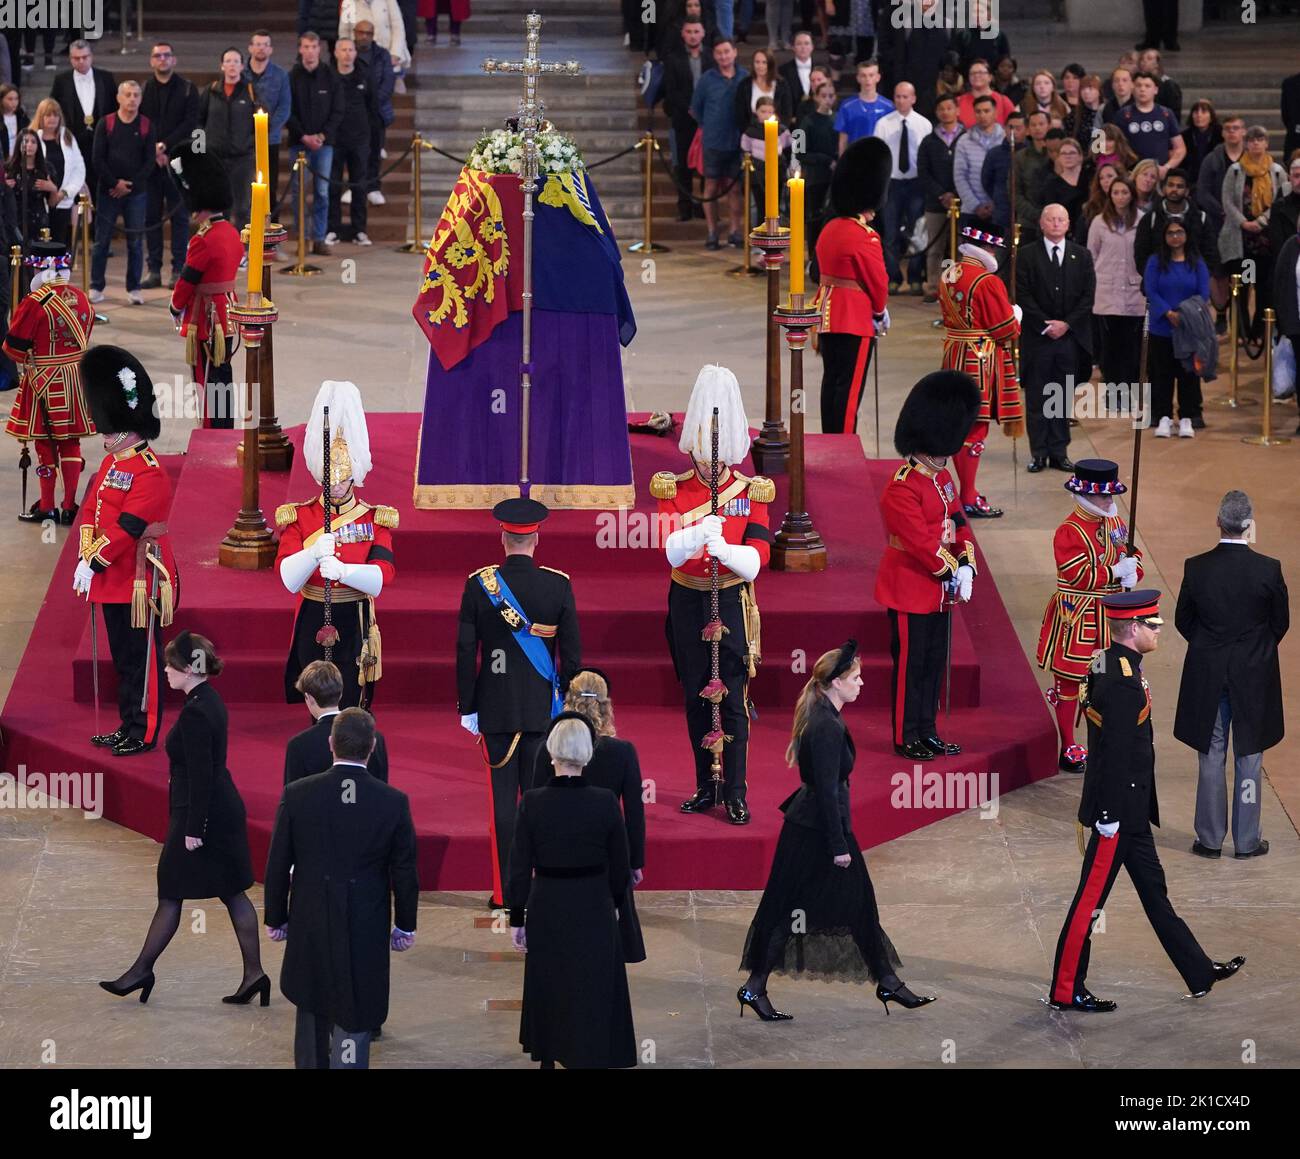 Queen Elizabeth II 's grandchildren (left to right) Princess Eugenie,James, Viscount Severn, Peter Phillips, the Prince of Wales, Zara Tindall, Lady Louise Windsor, Princess Beatrice, and the Duke of Sussex arrive to stand a vigil beside the coffin of their grandmother as it lies in state on the catafalque in Westminster Hall, at the Palace of Westminster, London. Picture date: Saturday September 17, 2022. Stock Photo